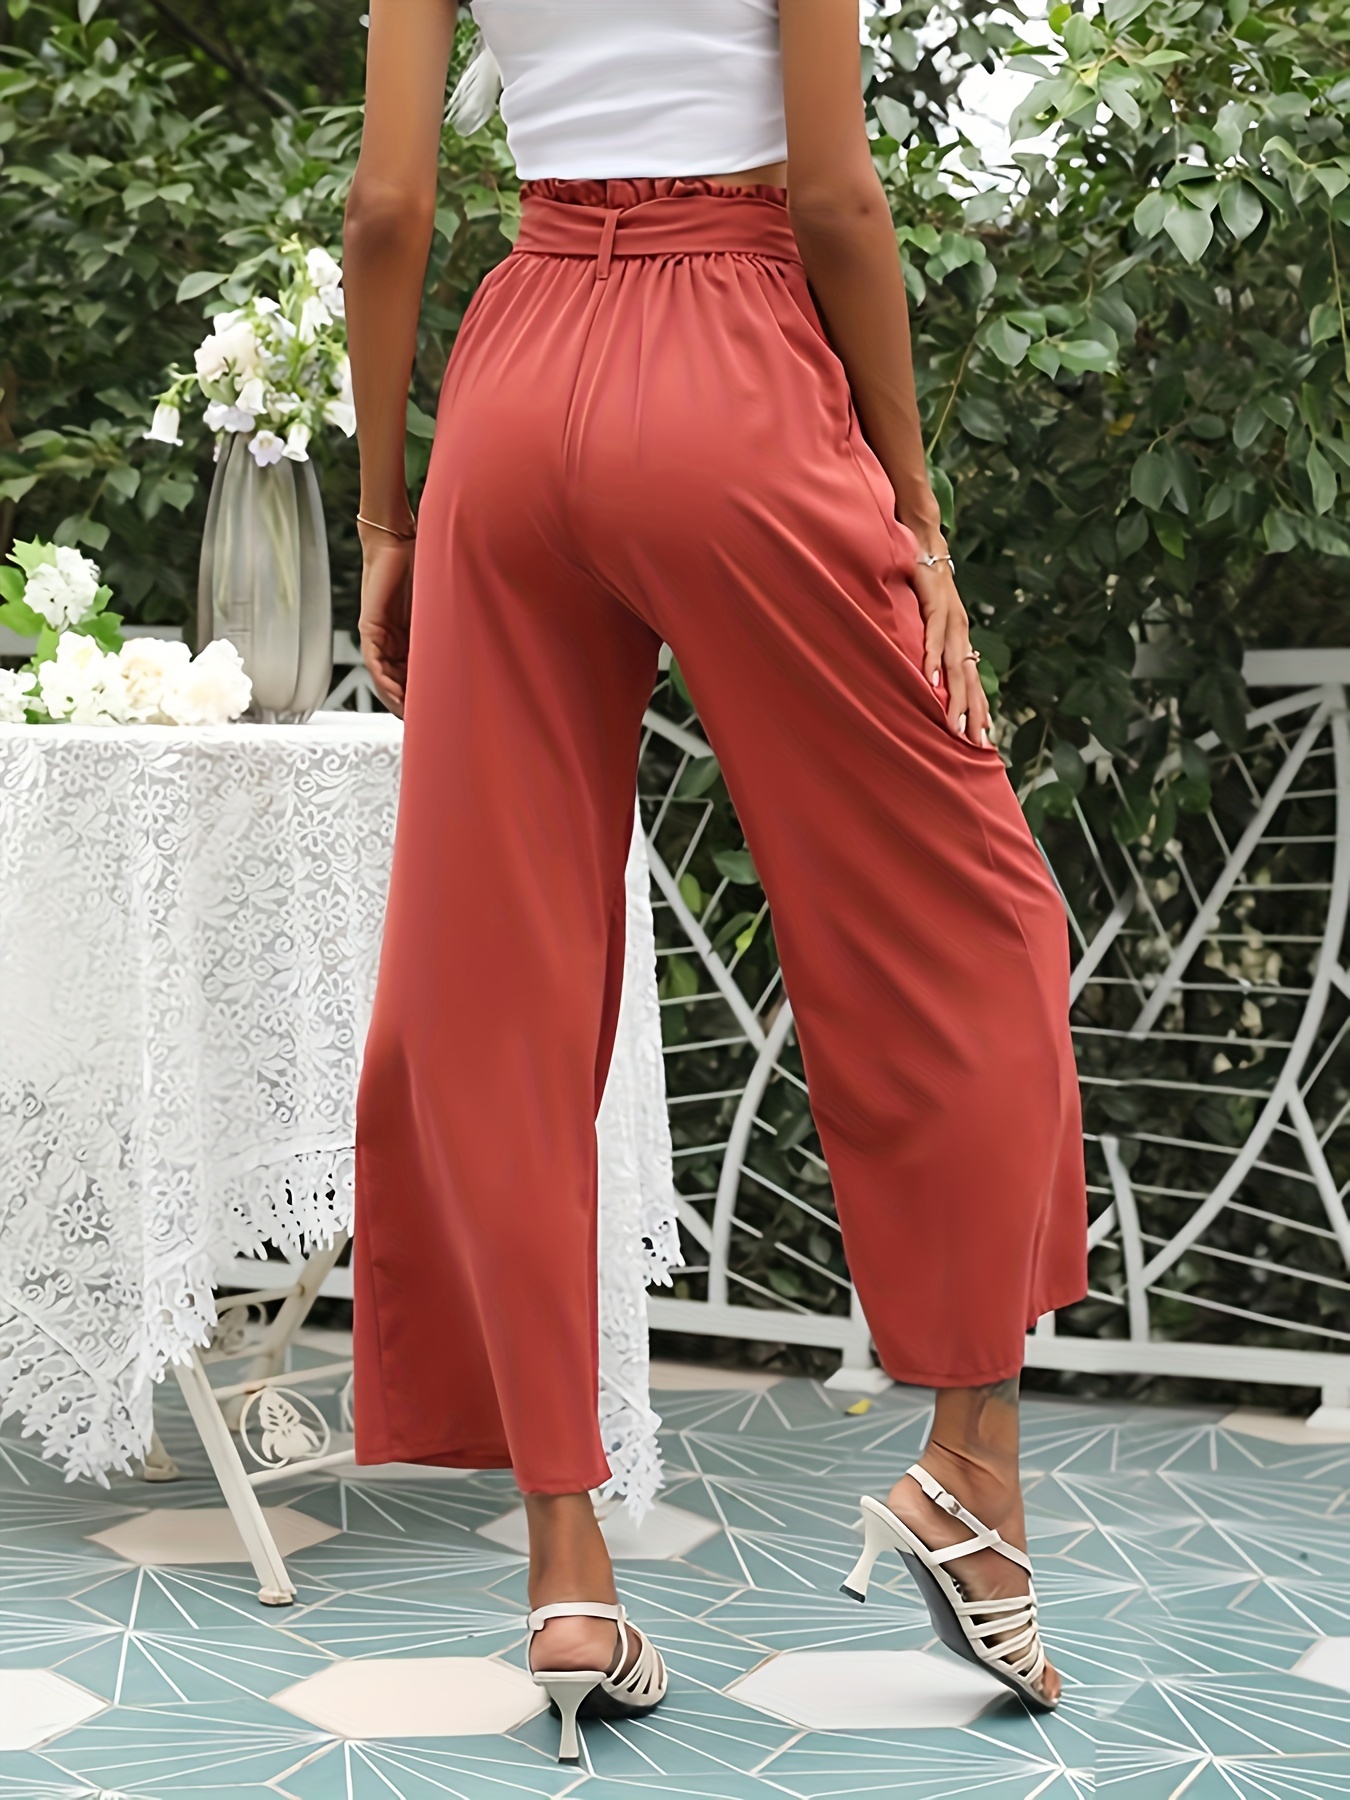 gvdentm Maternity Pants Women Casual Wide Leg Palazzo Pants High Waist  Smocked Trousers with Pockets For Women